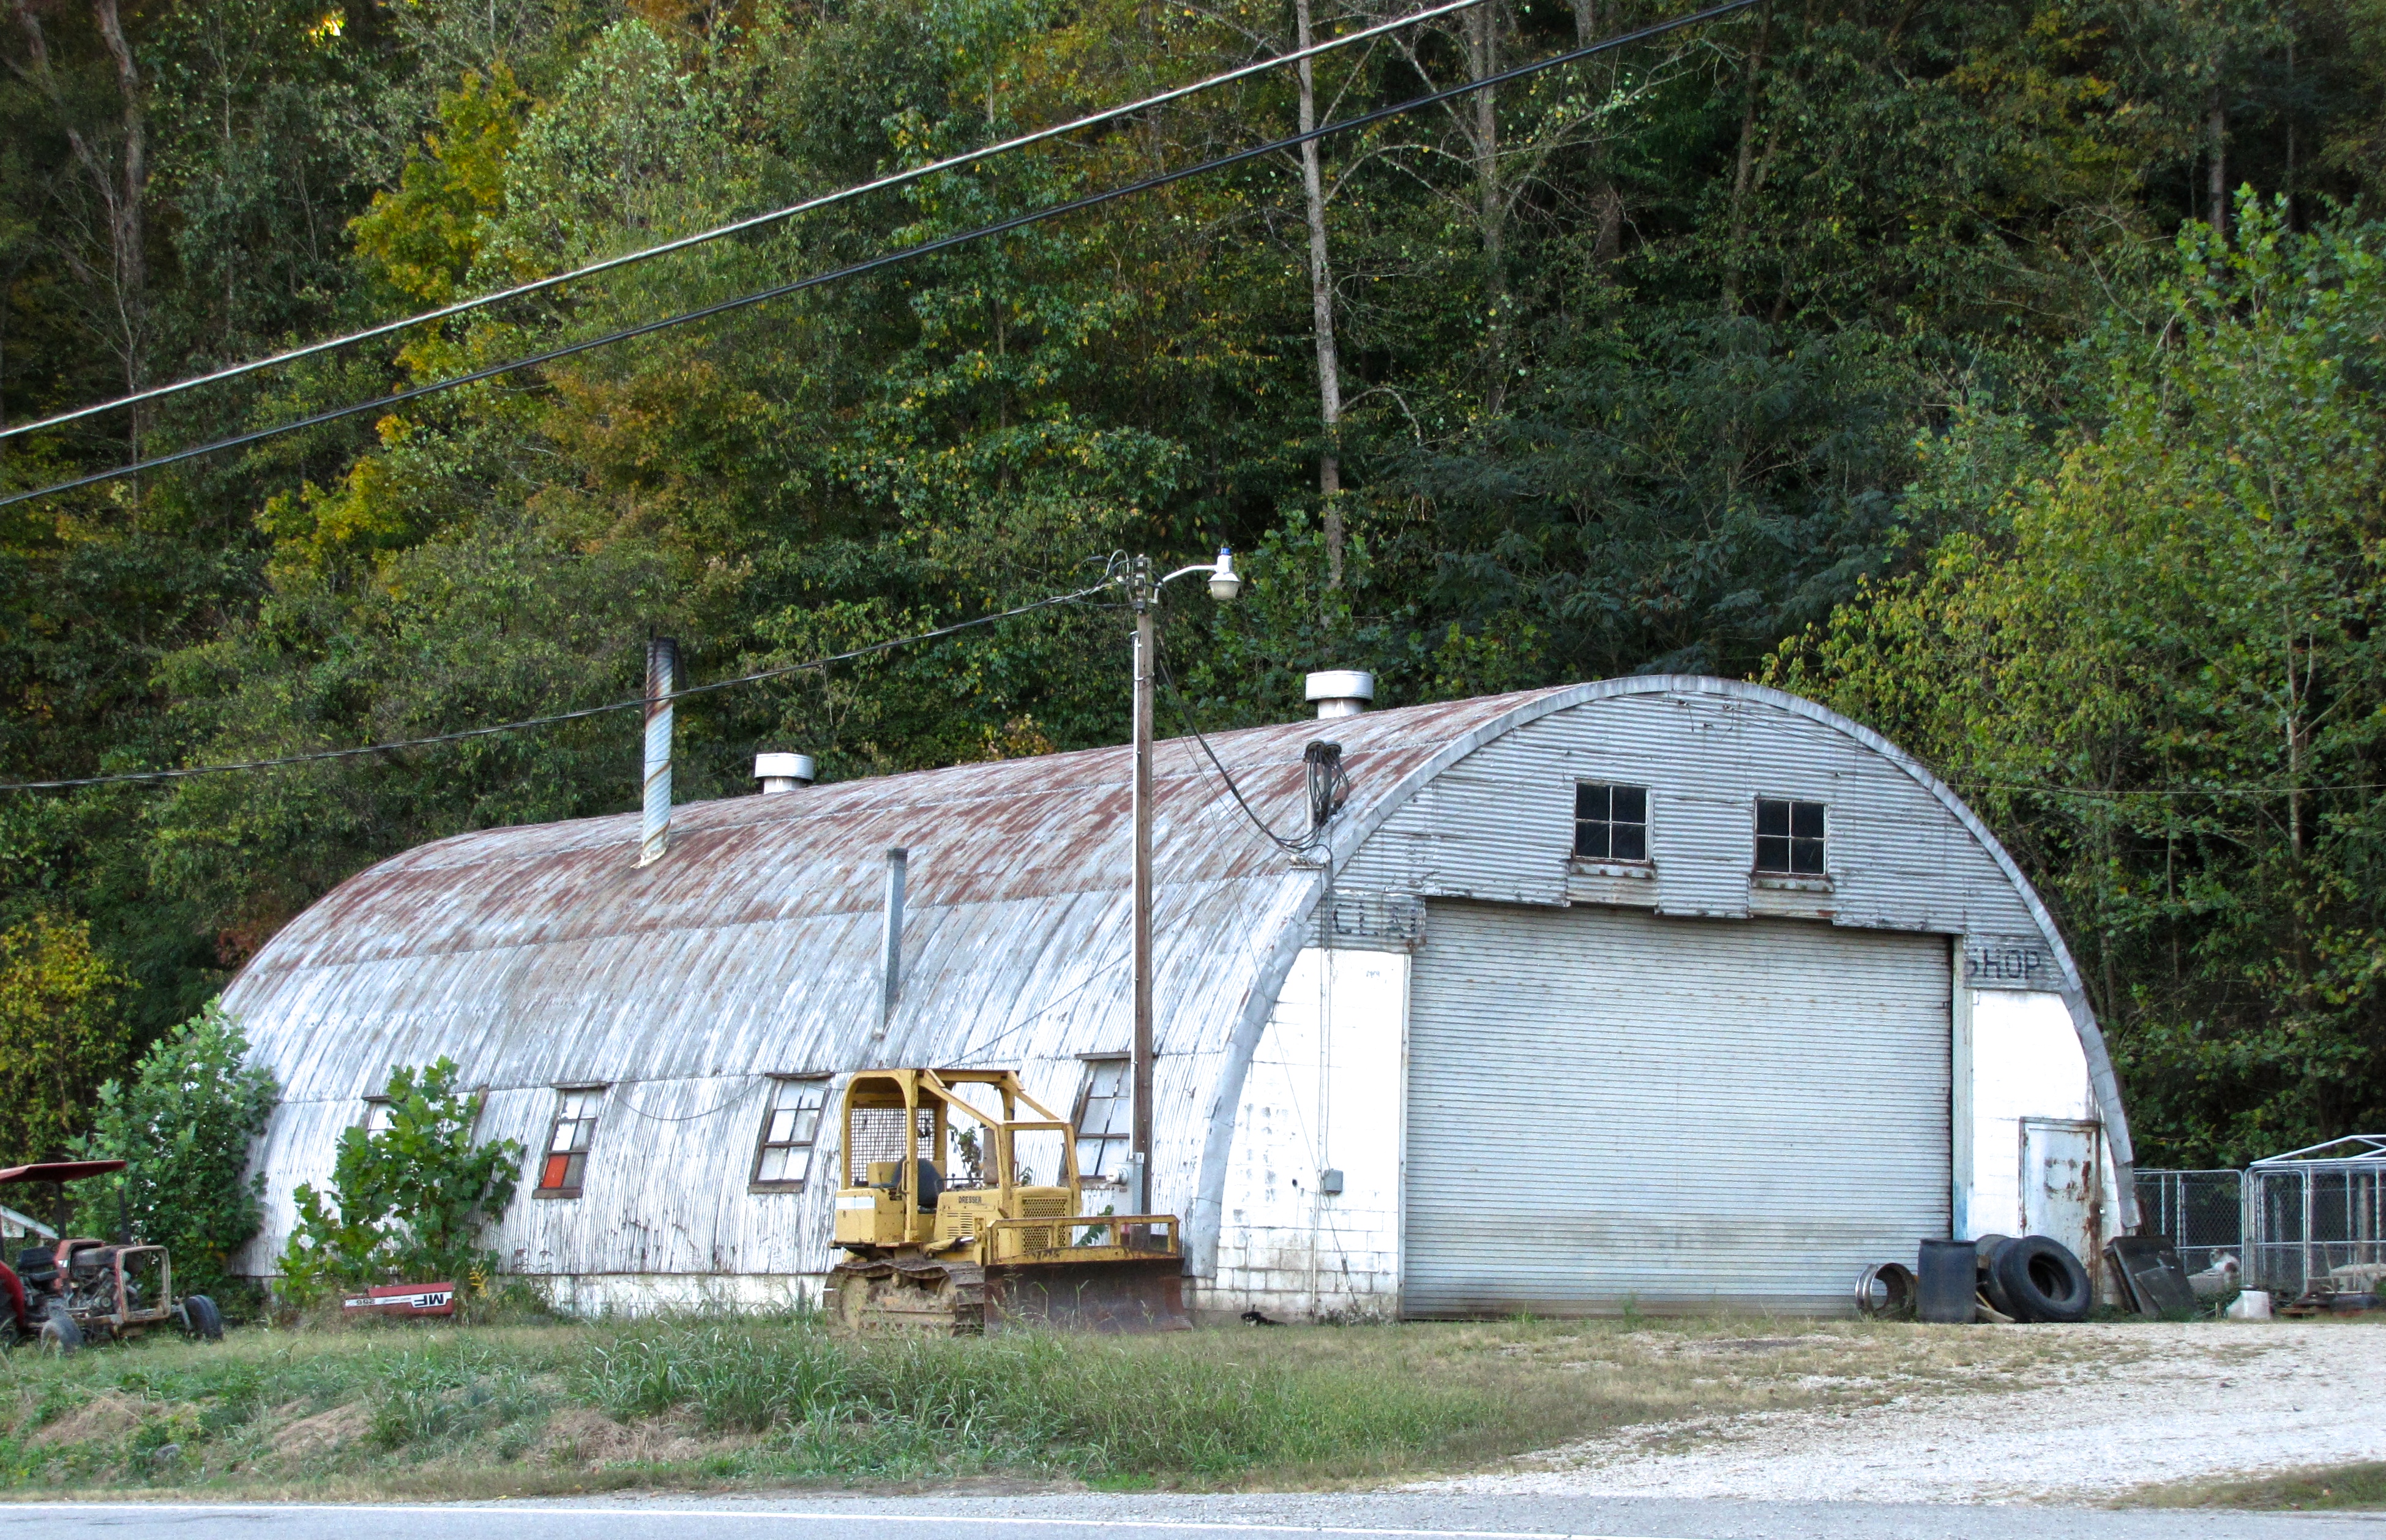 quonset hut in Brookhaven, MS